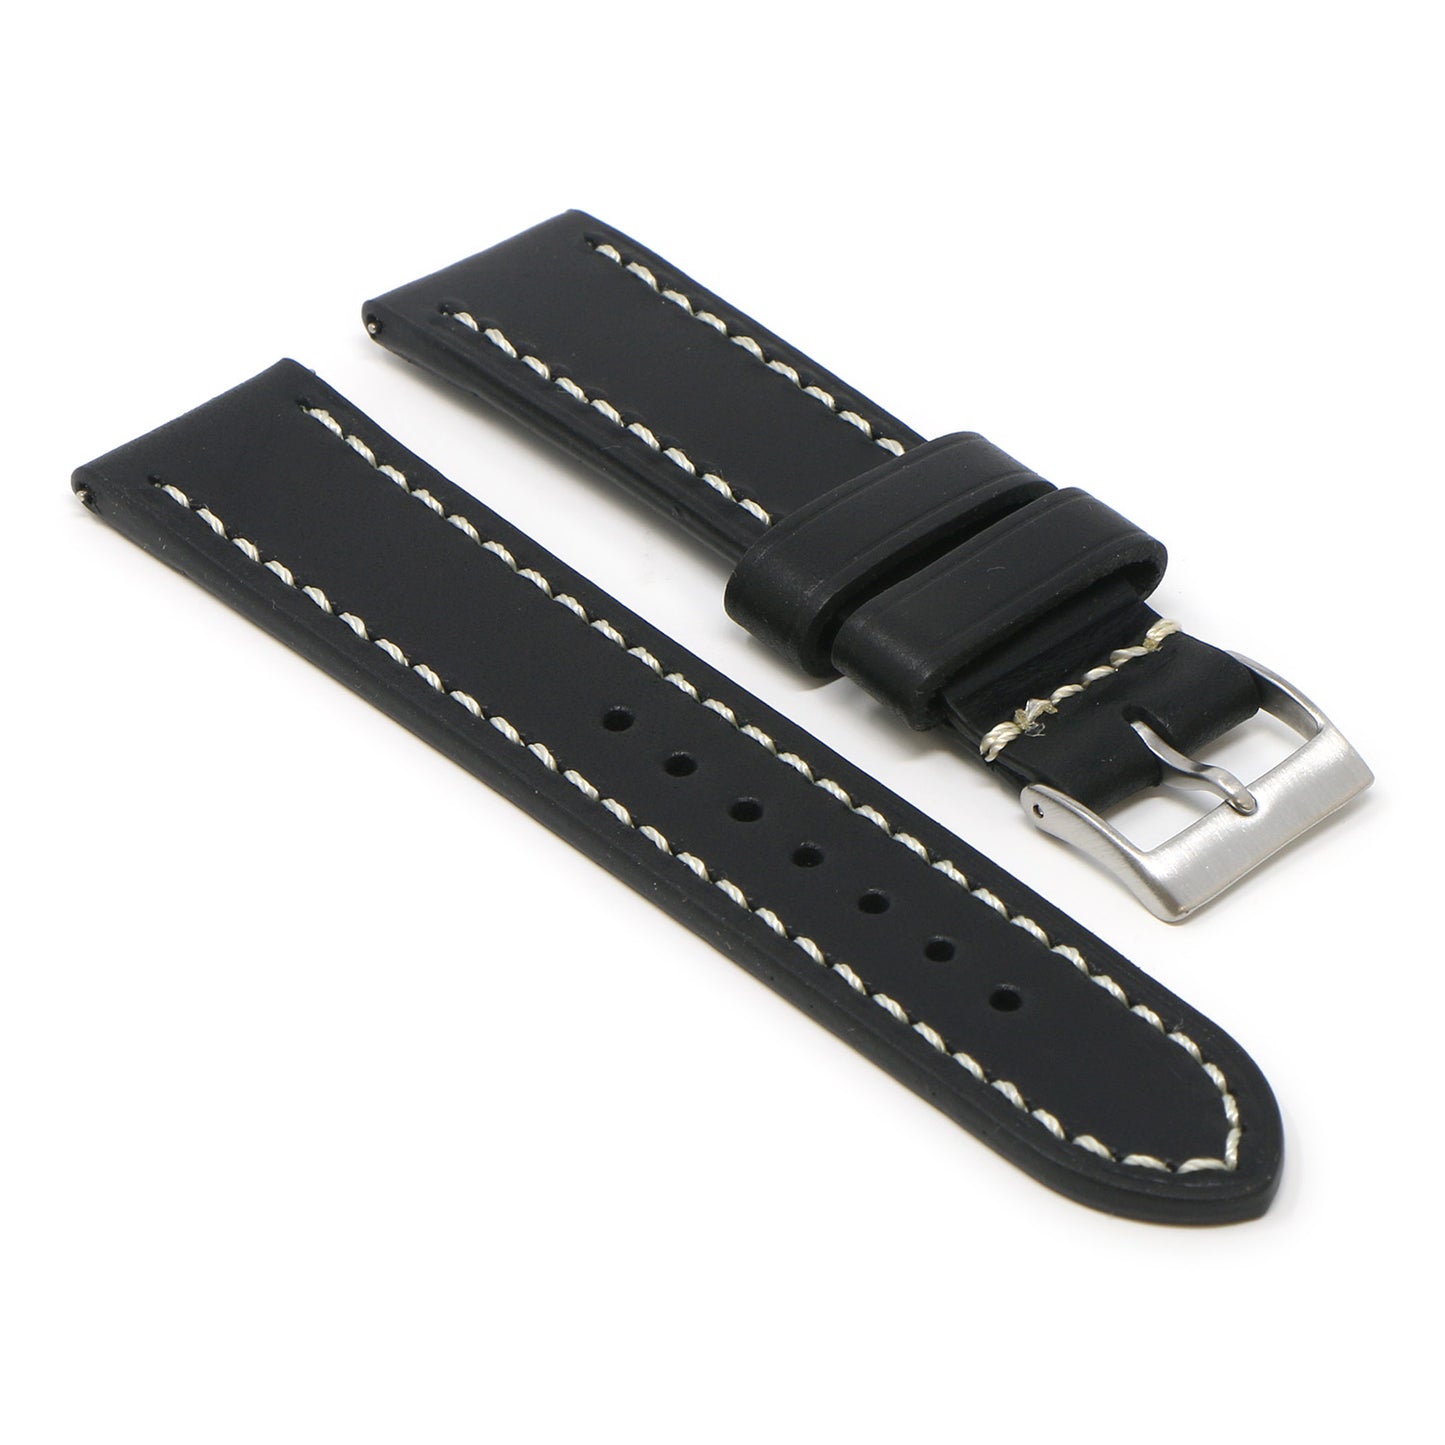 Vintage Leather Strap (Short, Standard, Extra Long) for Apple Watch